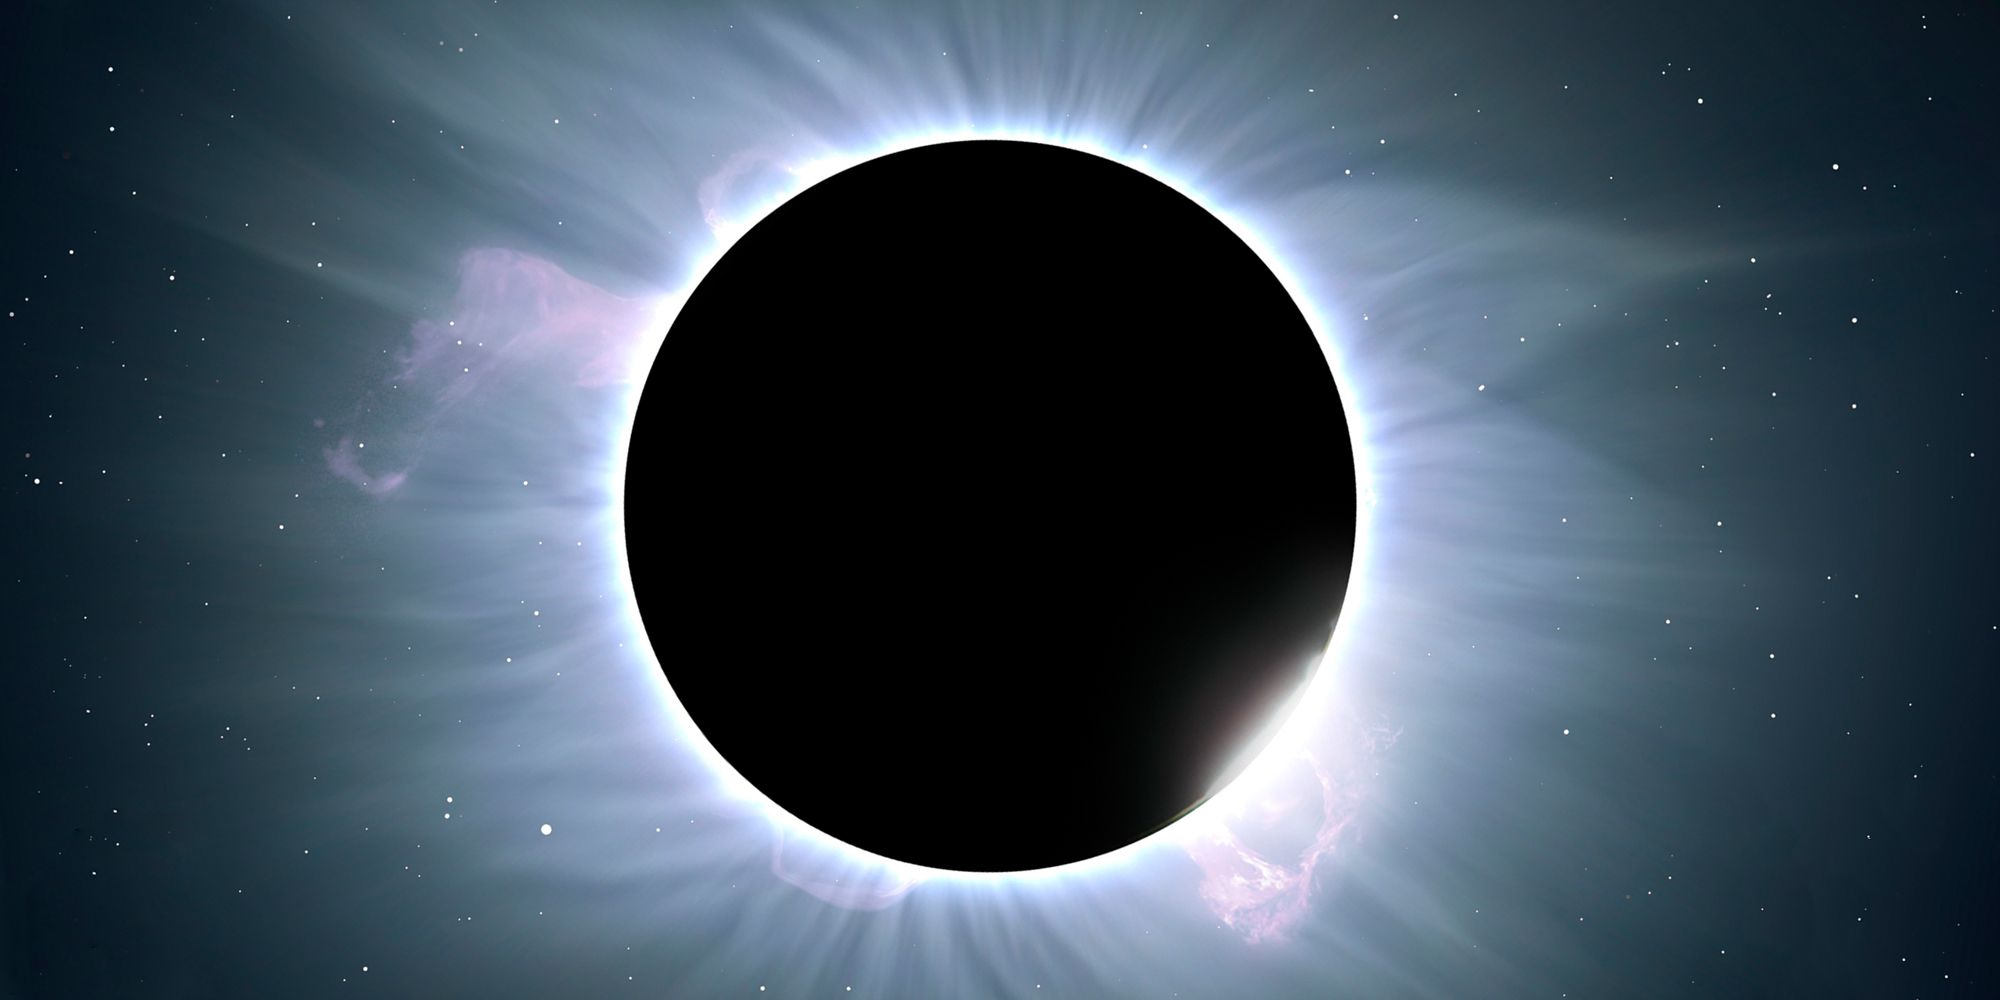 Studying the Sun's atmosphere with the total solar eclipse of 2017